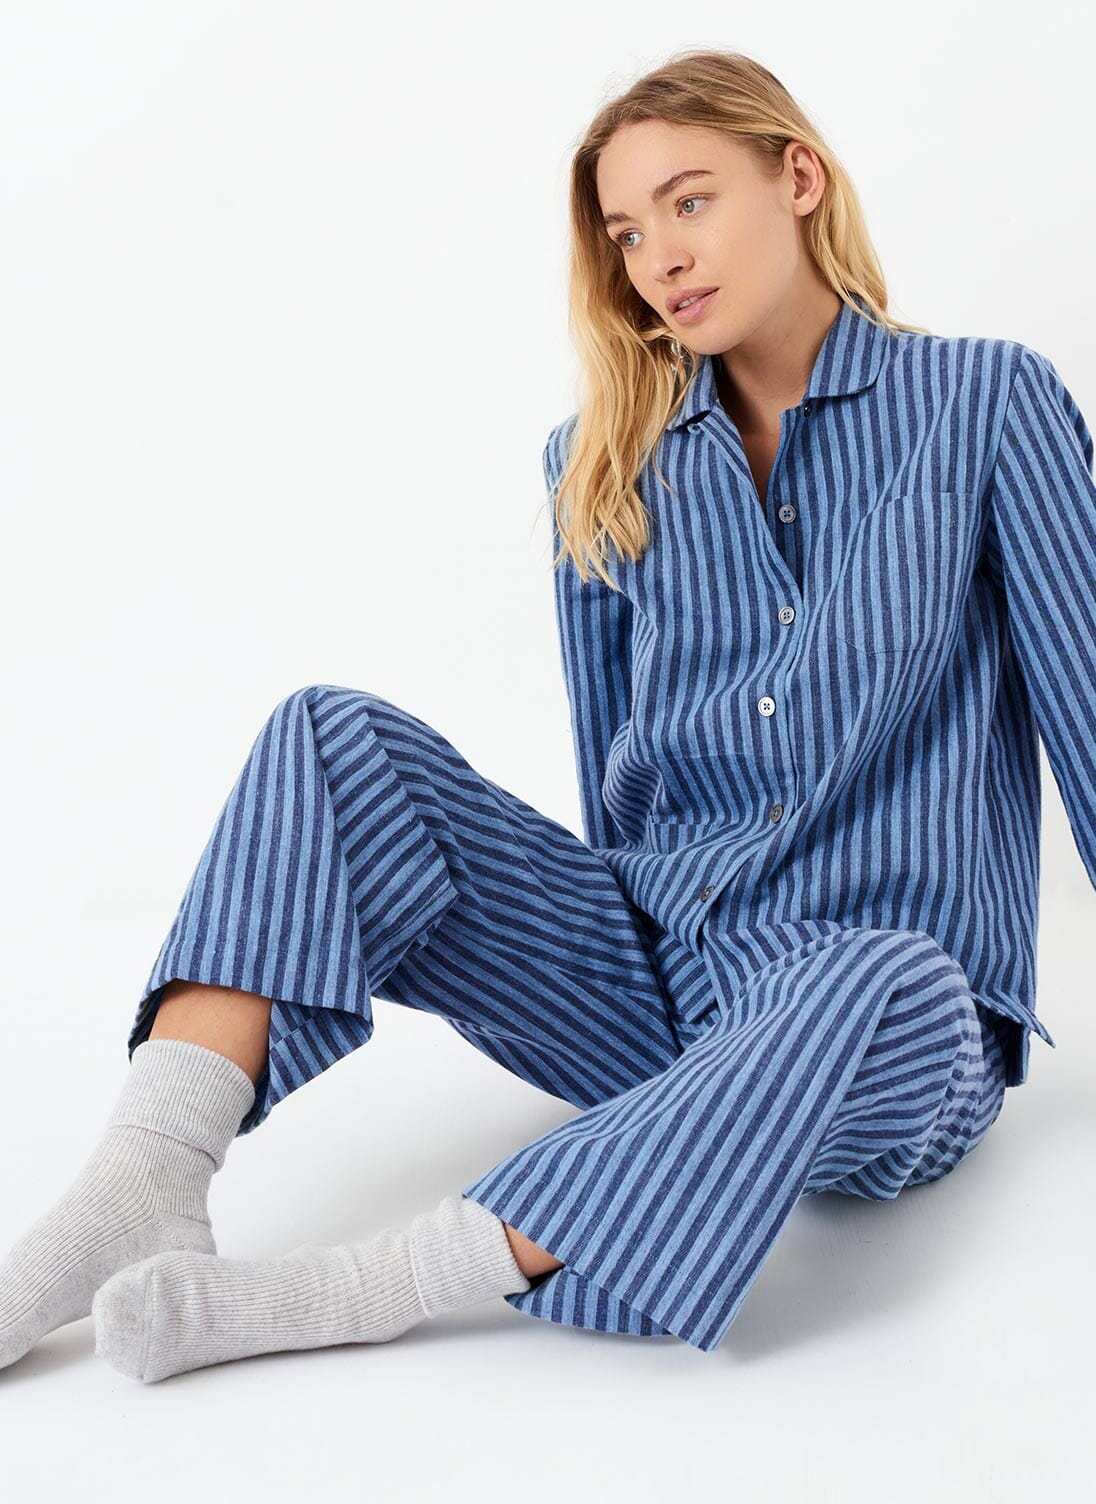 Women's Brushed Cotton Pyjama Bottoms, Cosy Blue and White Stripe